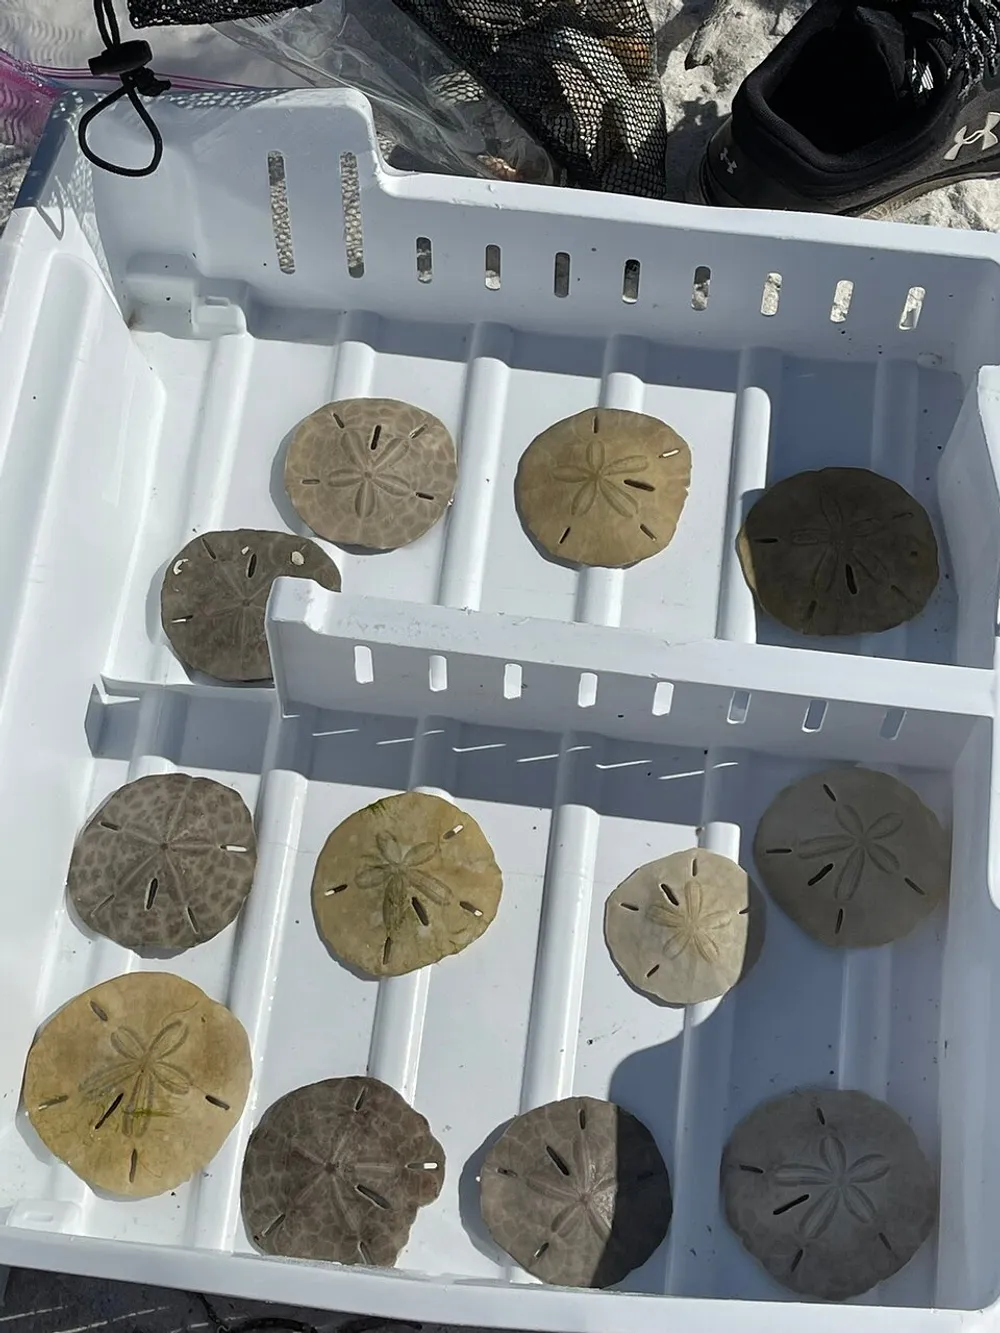 The image shows a collection of sand dollars neatly arranged in a white plastic tray that is placed on a sandy surface under bright sunlight